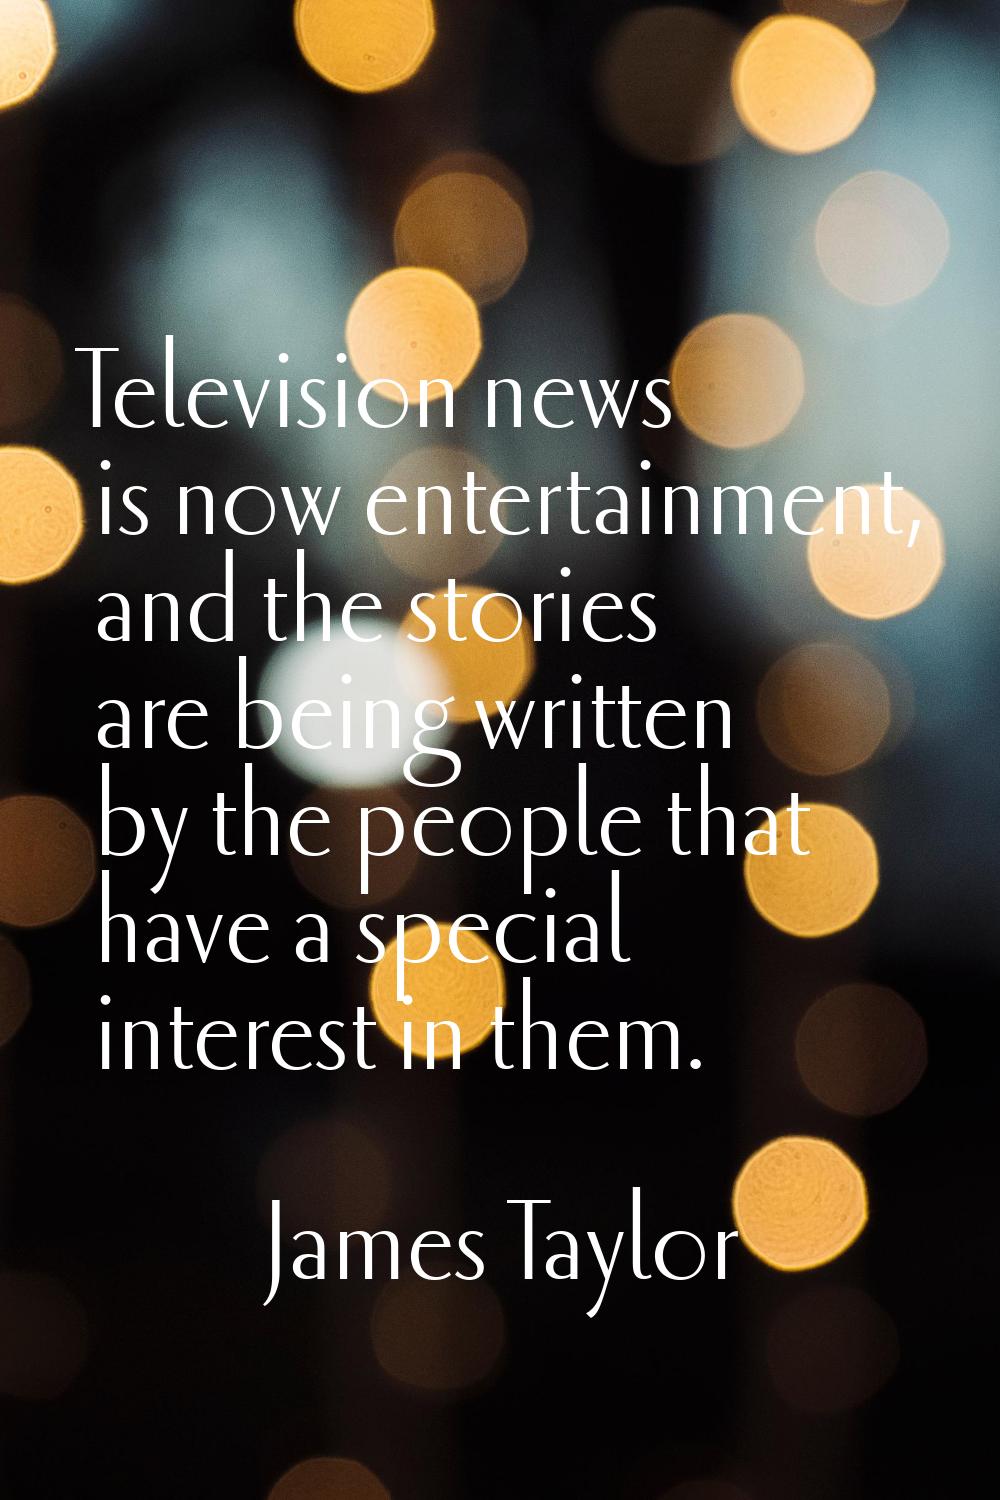 Television news is now entertainment, and the stories are being written by the people that have a s